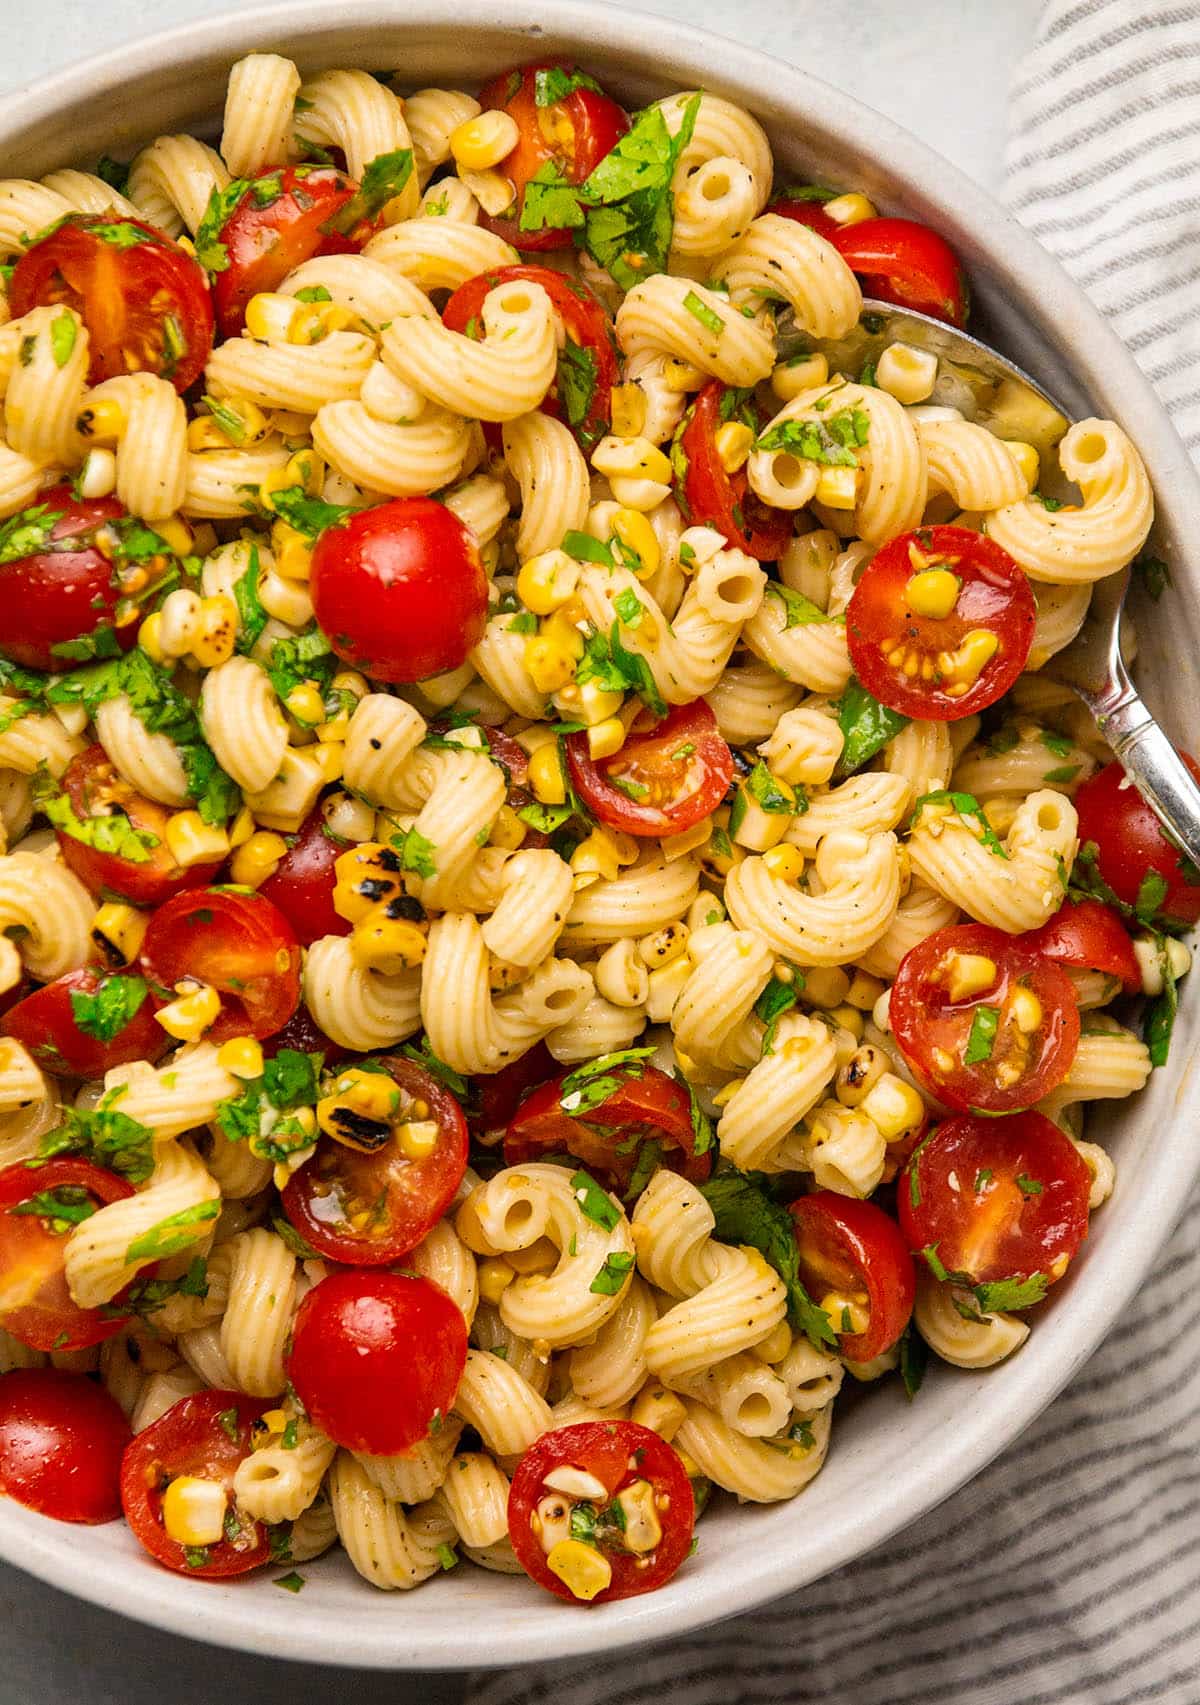 Spoon lifting a scoop of corn and tomato pasta salad out of a bowl.